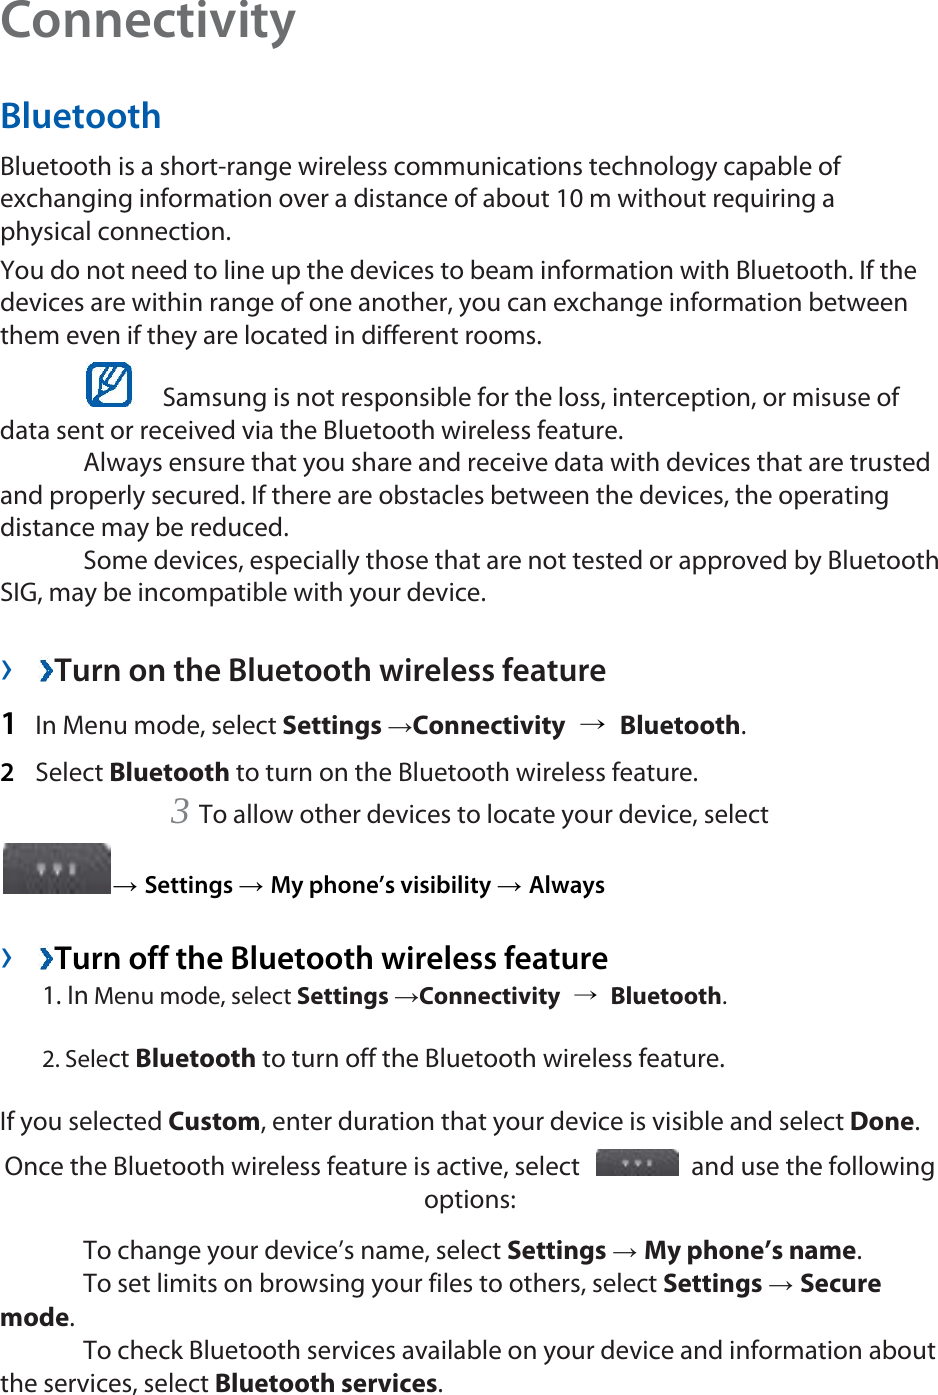 Connectivity  Bluetooth  Bluetooth is a short-range wireless communications technology capable of exchanging information over a distance of about 10 m without requiring a physical connection.   You do not need to line up the devices to beam information with Bluetooth. If the devices are within range of one another, you can exchange information between them even if they are located in different rooms.      Samsung is not responsible for the loss, interception, or misuse of data sent or received via the Bluetooth wireless feature.    Always ensure that you share and receive data with devices that are trusted and properly secured. If there are obstacles between the devices, the operating distance may be reduced.    Some devices, especially those that are not tested or approved by Bluetooth SIG, may be incompatible with your device.    ›  Turn on the Bluetooth wireless feature   1  In Menu mode, select Settings →Connectivity  → Bluetooth.  2  Select Bluetooth to turn on the Bluetooth wireless feature.   3 To allow other devices to locate your device, select   → Settings → My phone’s visibility → Always   ›  Turn off the Bluetooth wireless feature   1. In Menu mode, select Settings →Connectivity  → Bluetooth. 2. Select Bluetooth to turn off the Bluetooth wireless feature. If you selected Custom, enter duration that your device is visible and select Done.  Once the Bluetooth wireless feature is active, select    and use the following options:   To change your device’s name, select Settings → My phone’s name.   To set limits on browsing your files to others, select Settings → Secure mode.   To check Bluetooth services available on your device and information about the services, select Bluetooth services.  